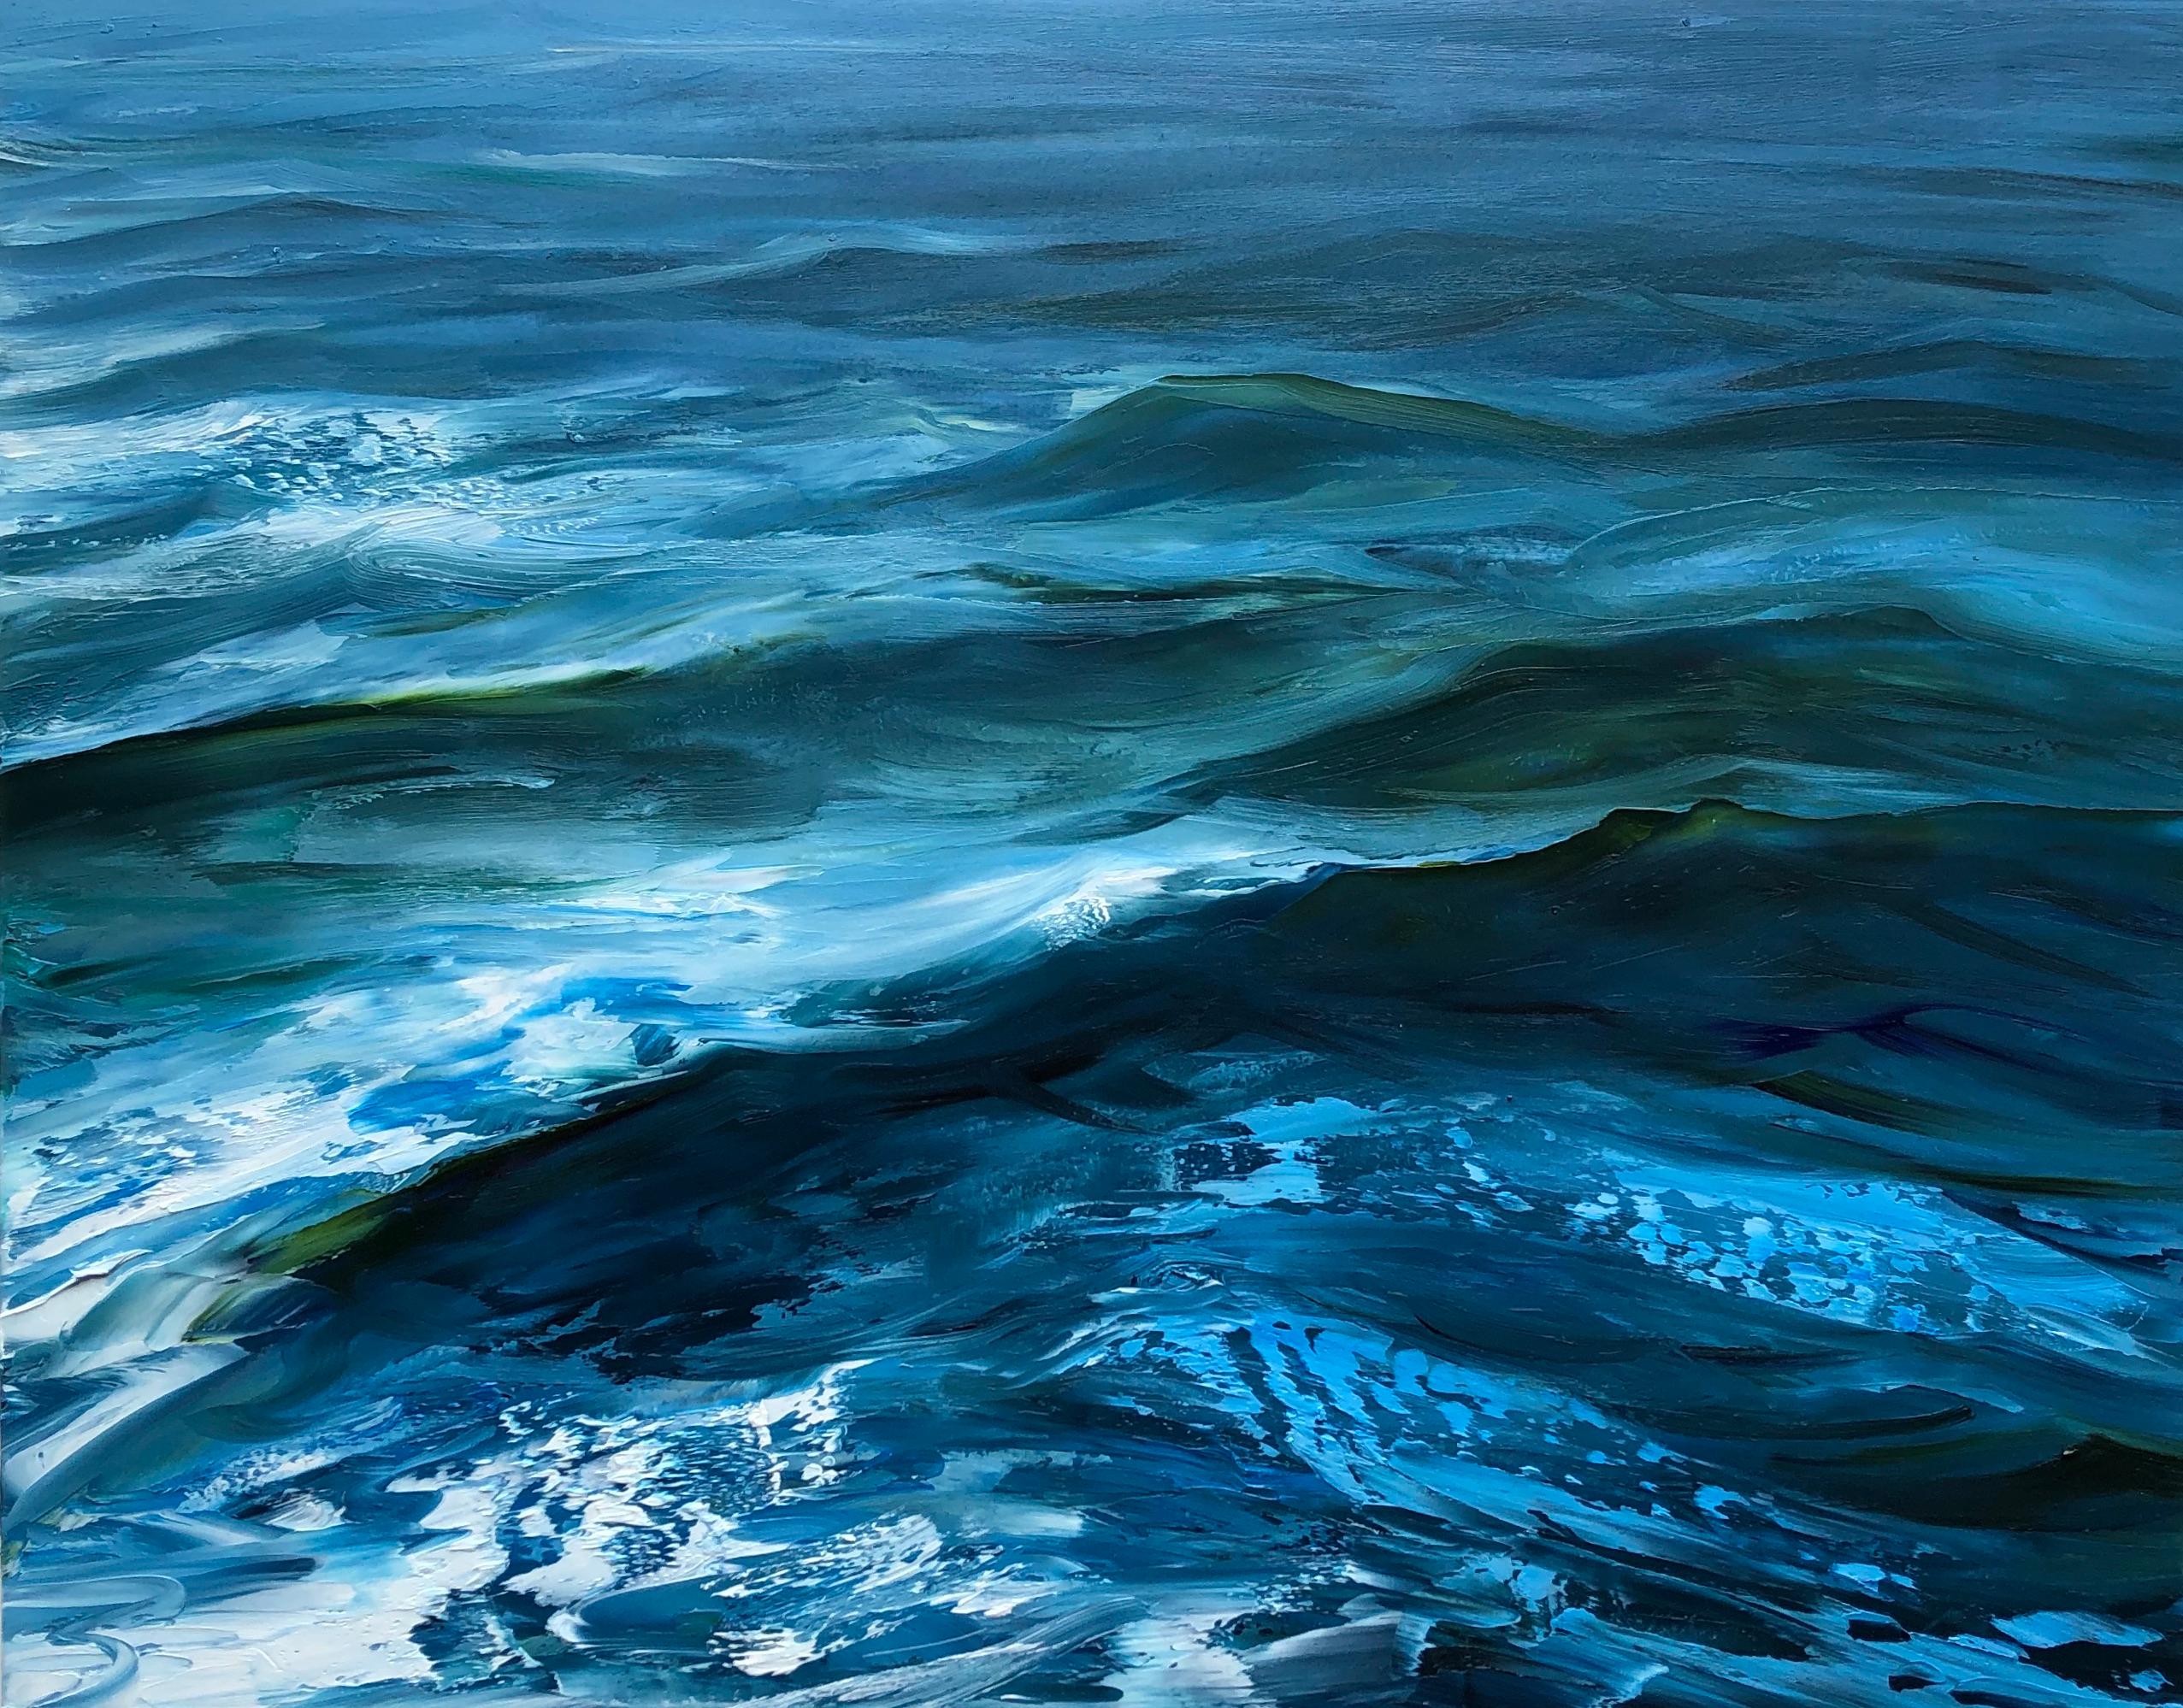 Whitney Knapp Landscape Painting - "Crossing" oil painting of waves in a deep blue ocean